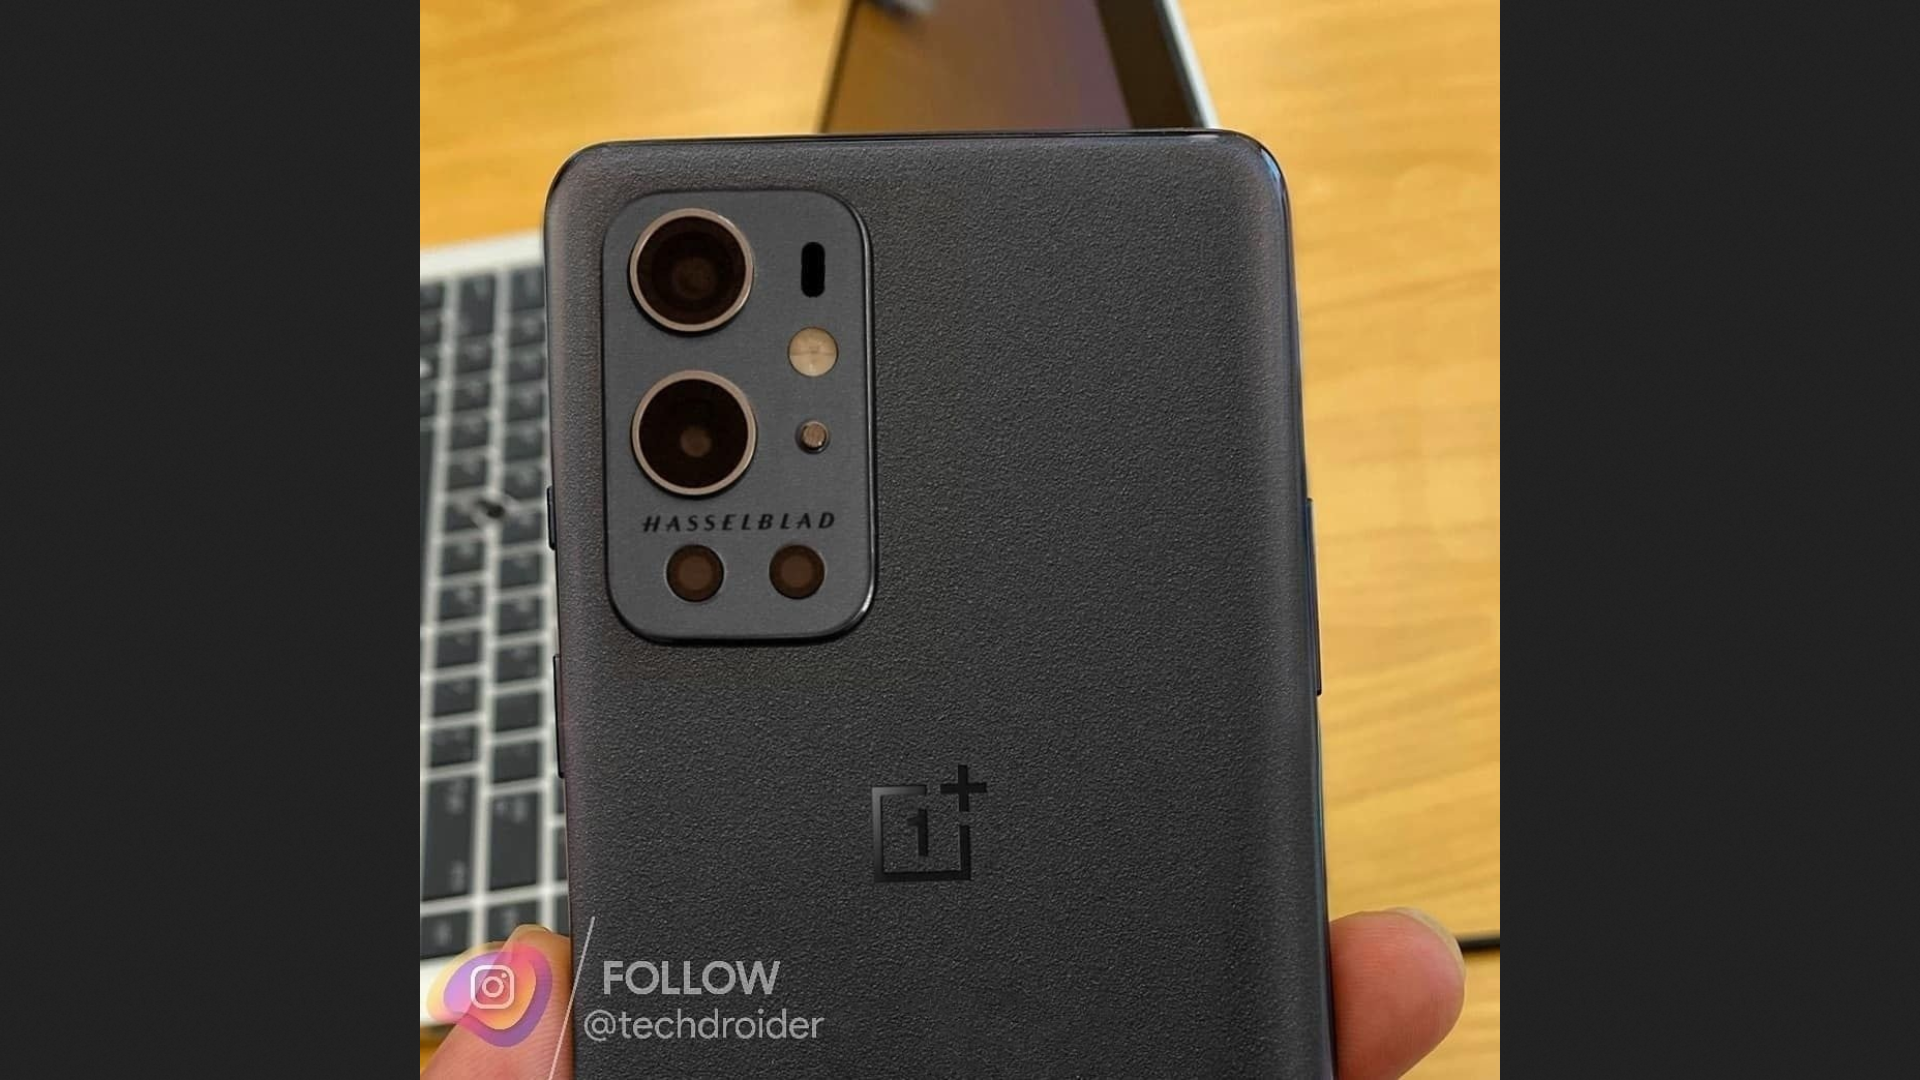 OnePlus exalts its new camera technology again as the Stellar Black version of the 9 Pro leaks